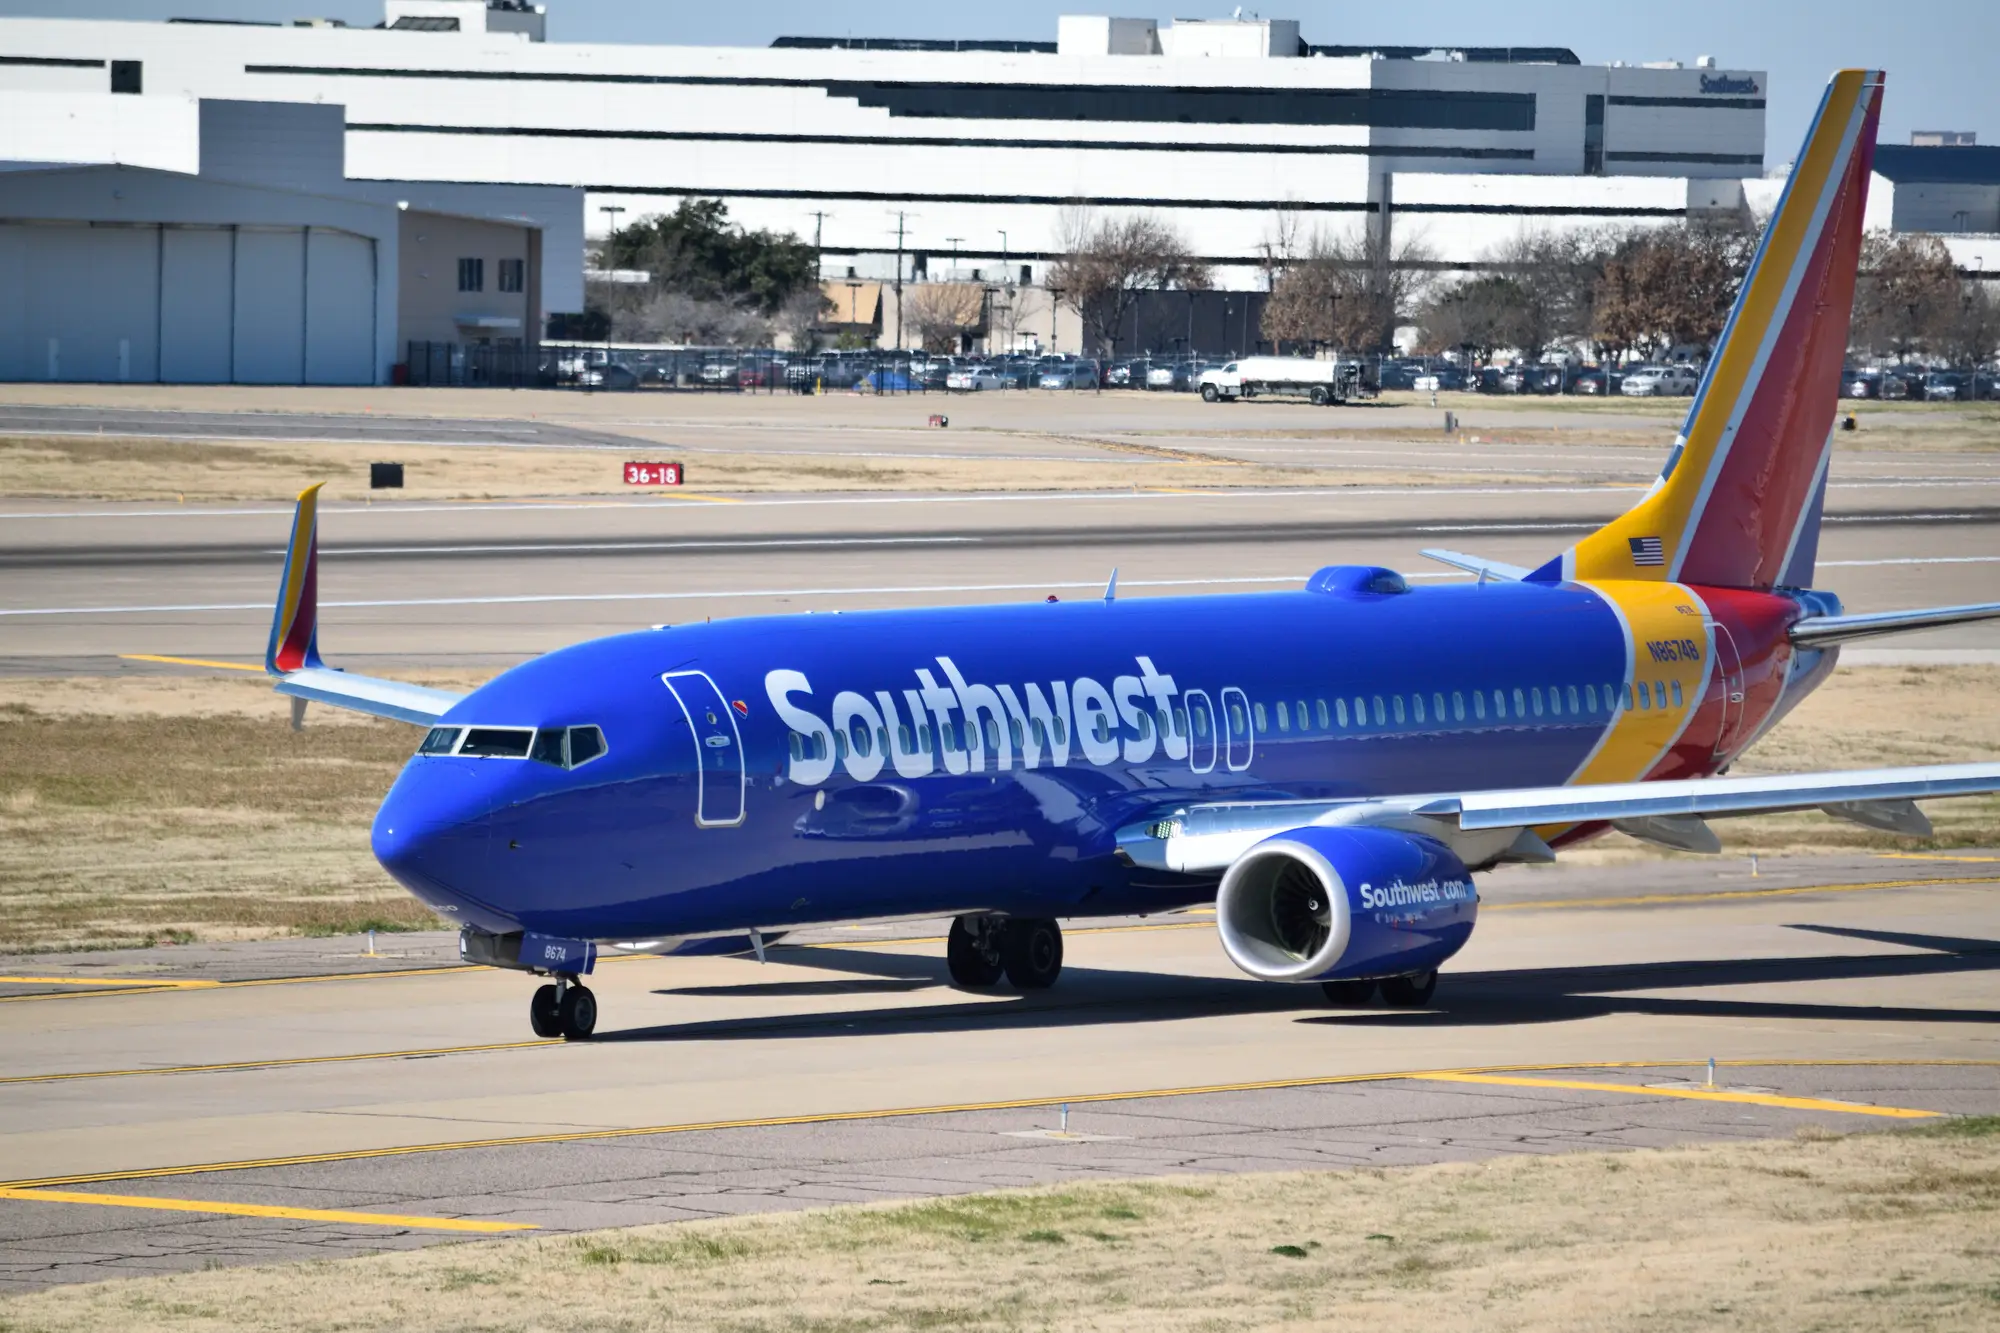 Say What Now?  U.S. Engine Covering Falls Off Boeing Plane, Strikes Wing Flap During Southwest Airlines Flight Denver Takeoff